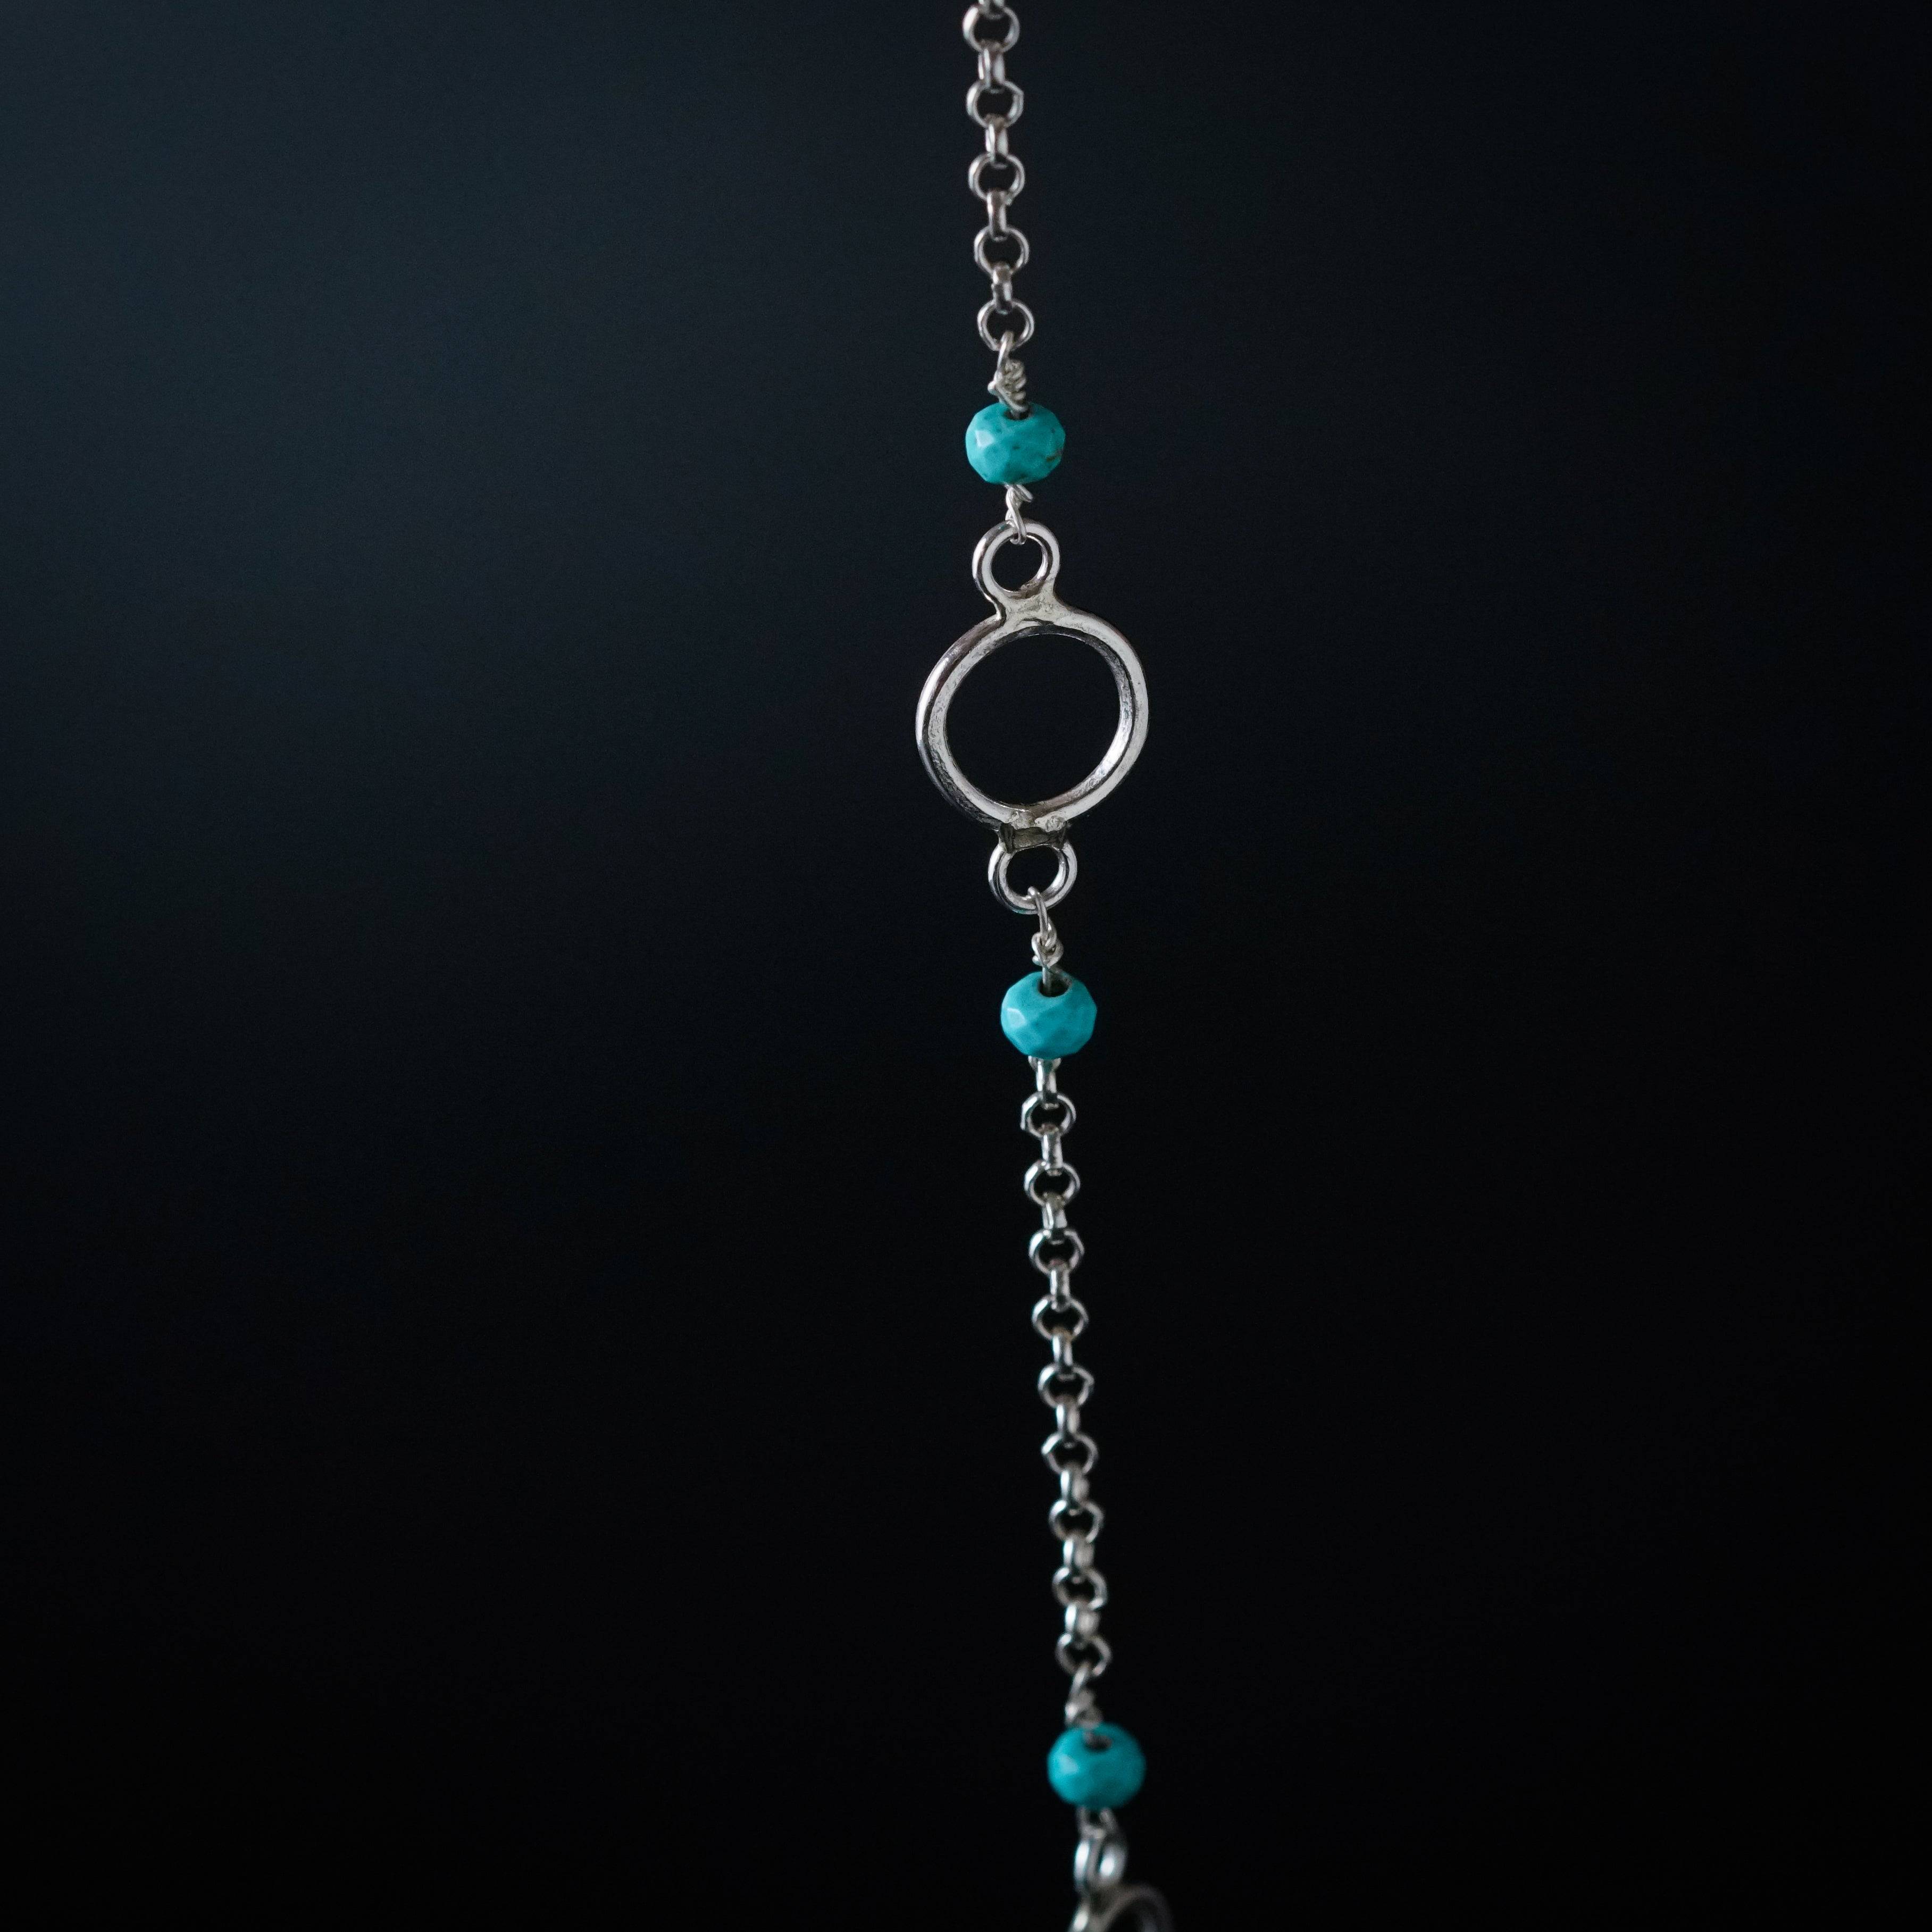 a silver chain with turquoise beads hanging from it